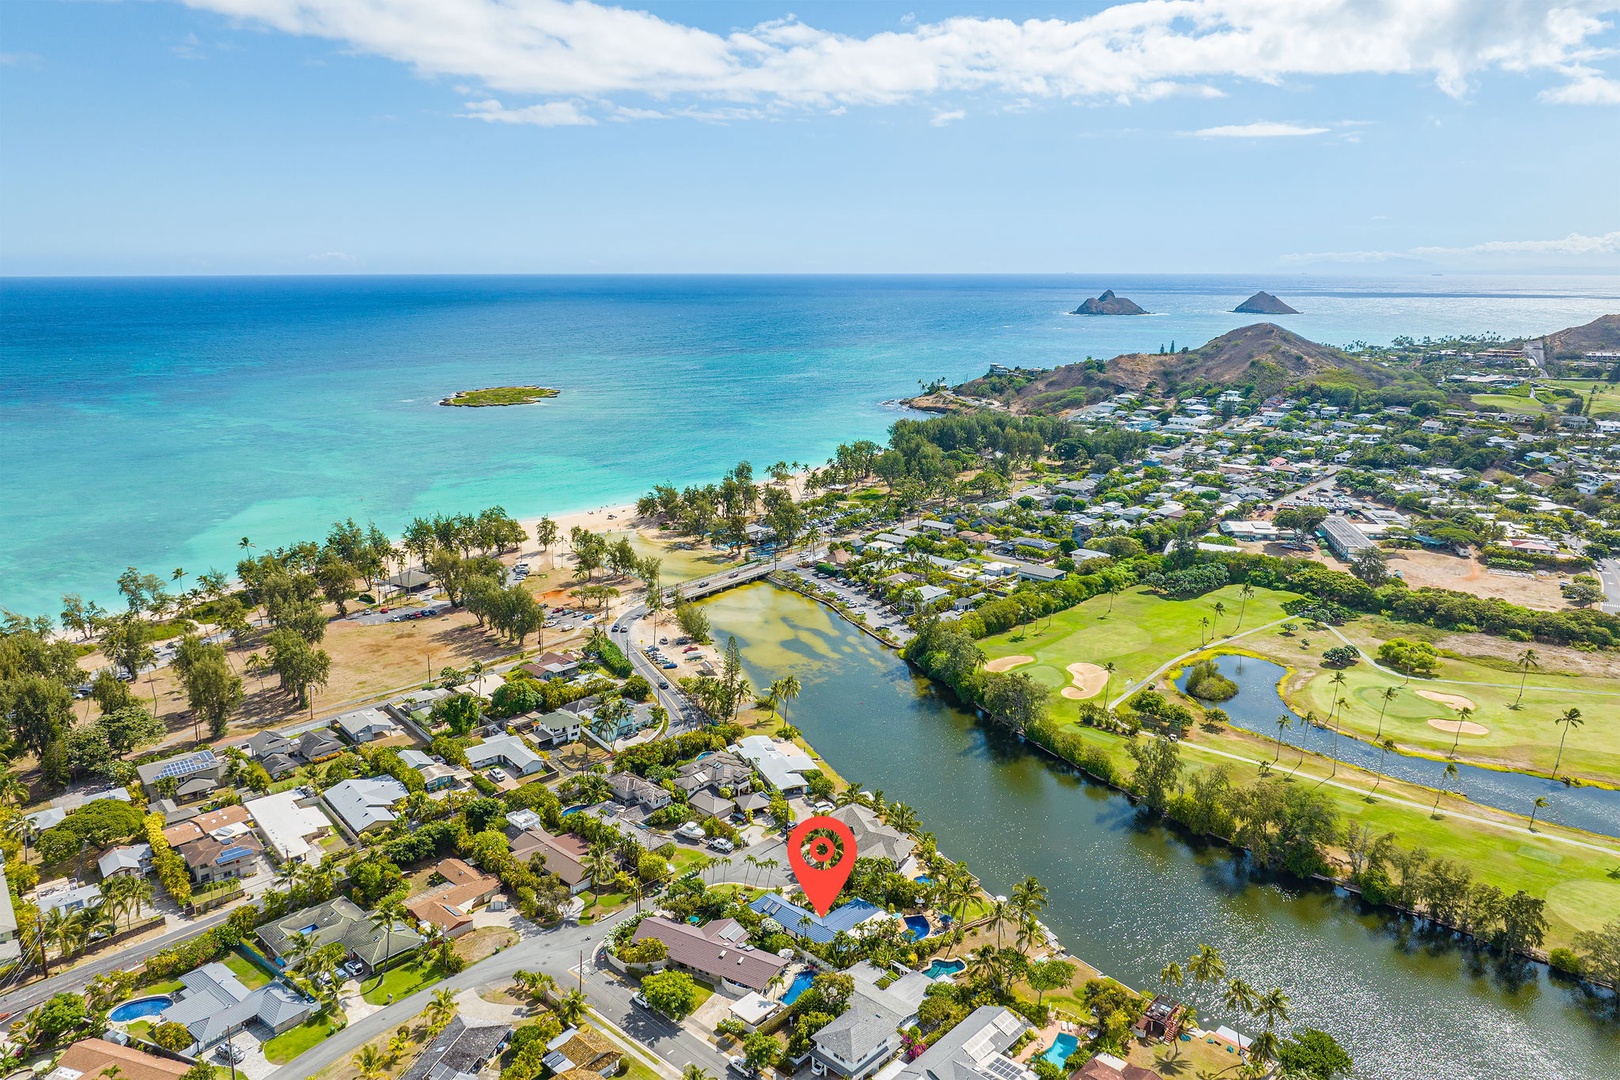 Kailua Vacation Rentals, Hale Aloha - Map pin location of your tranquil getaway.